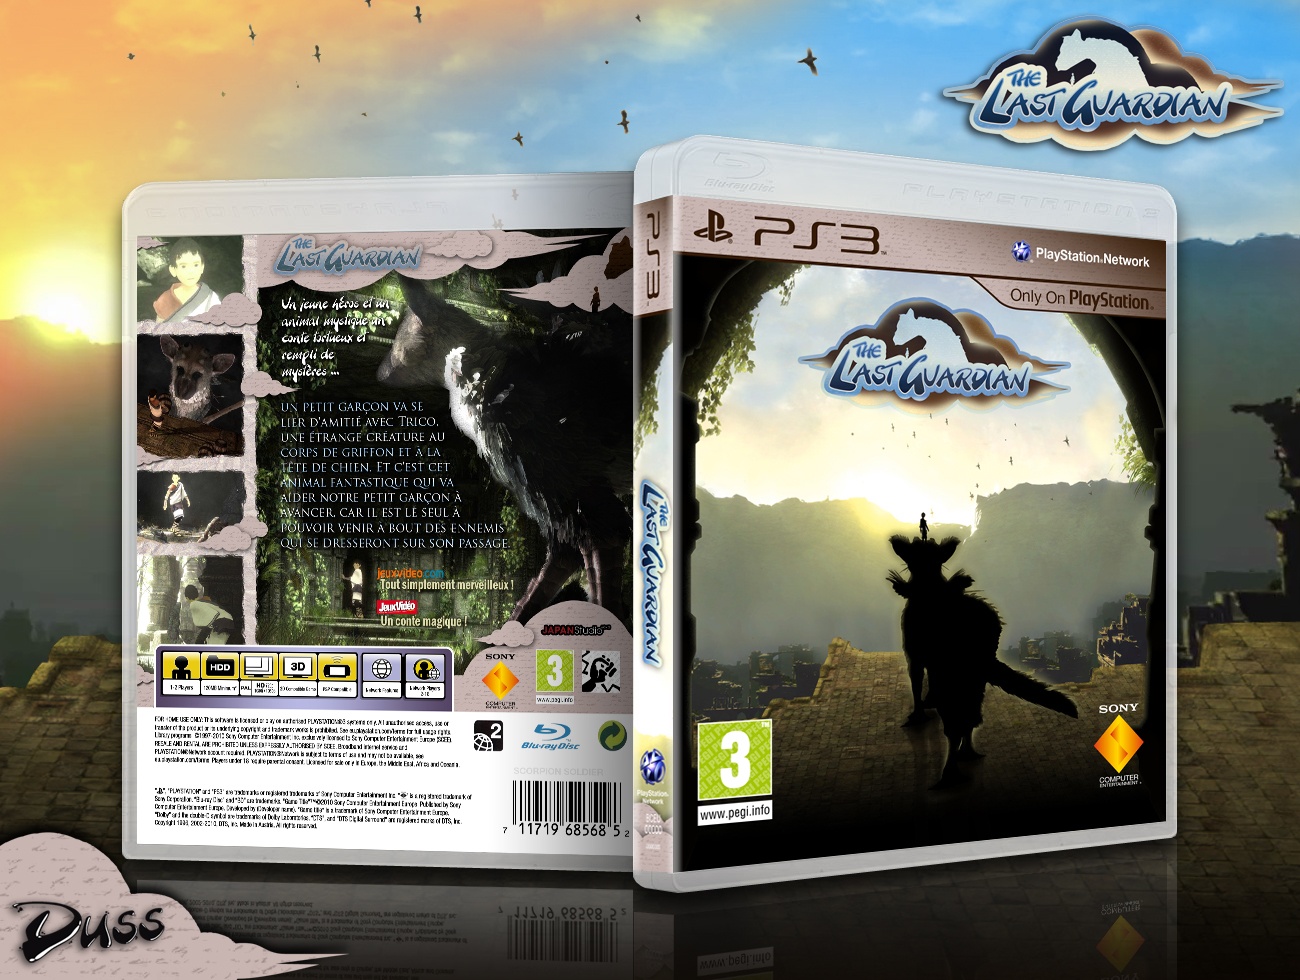 The Last Guardian for PlayStation 3